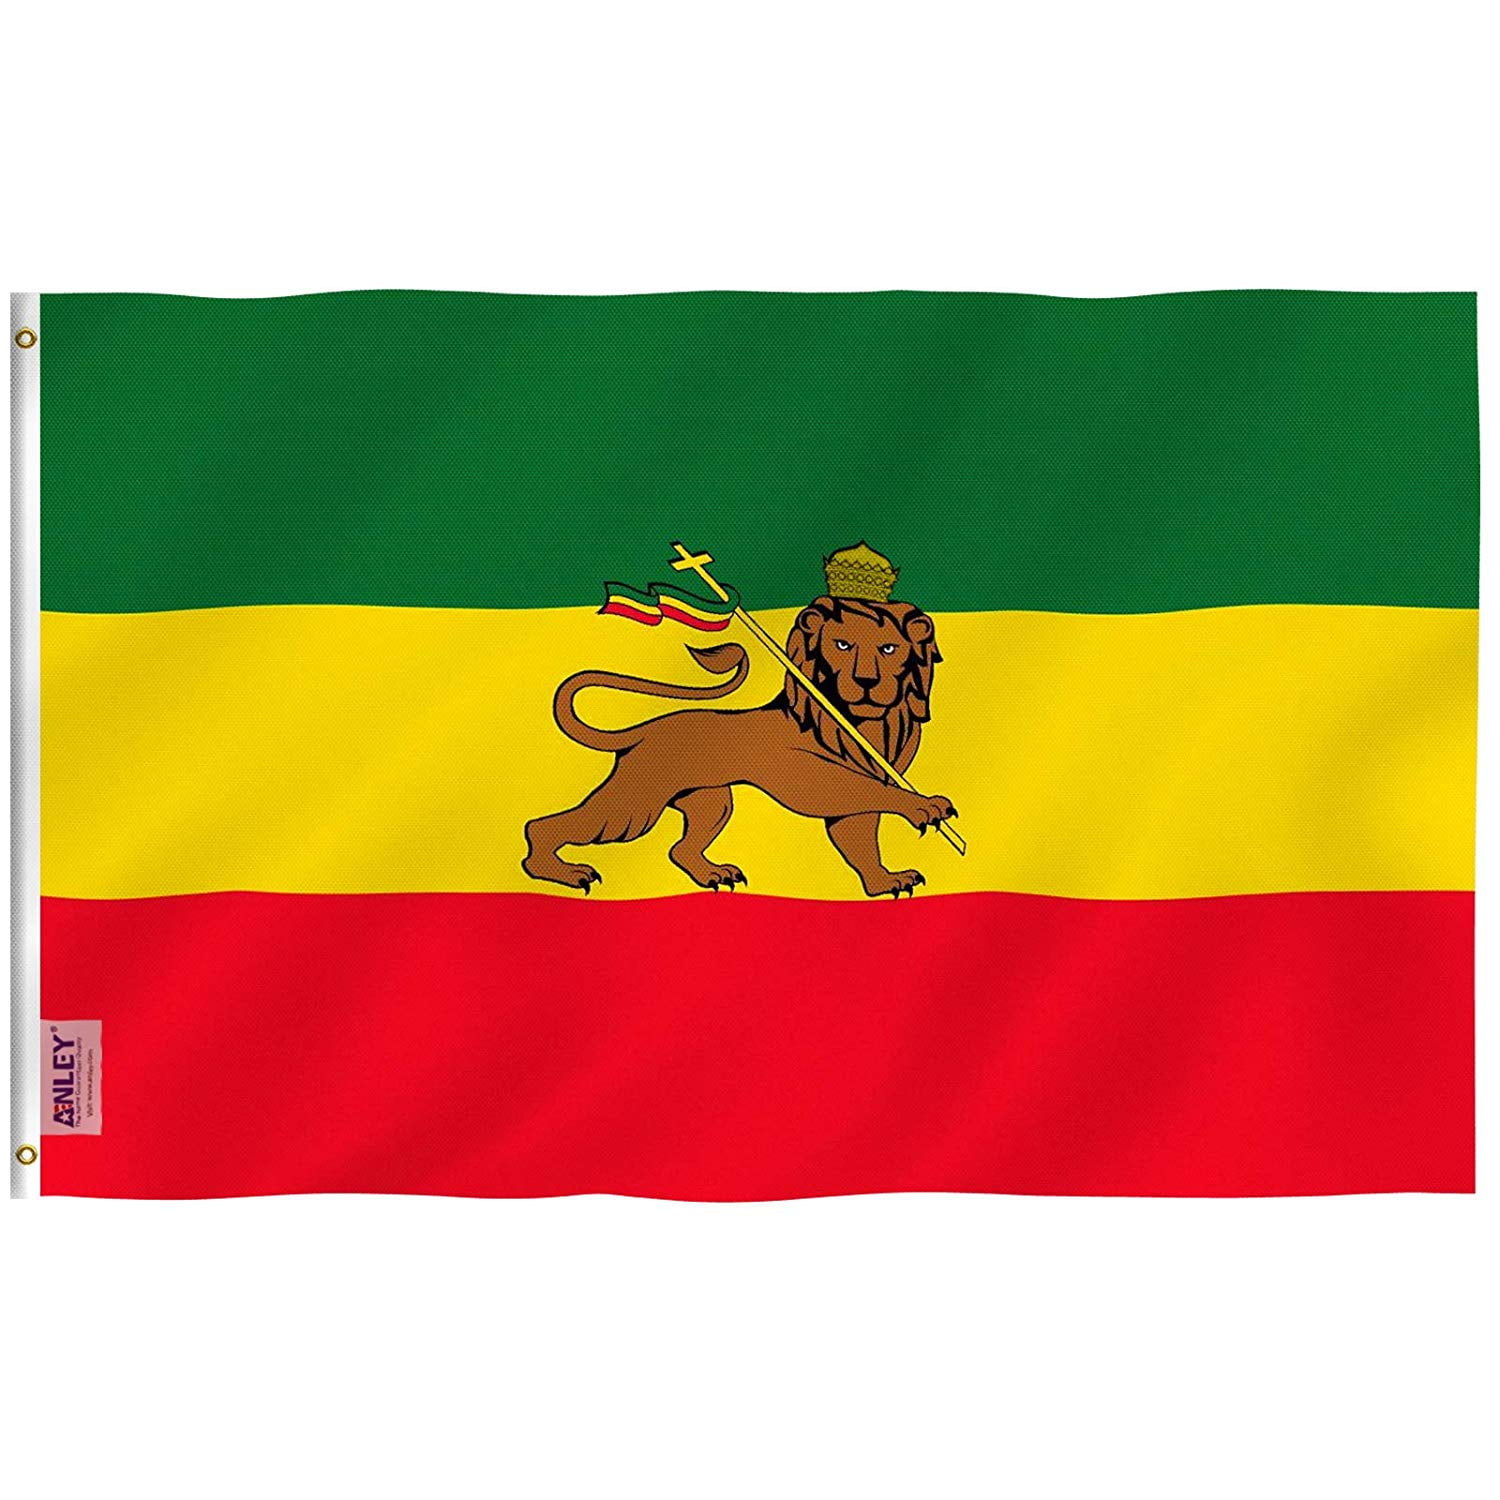 ETHIOPIA FLAG WITH LION 5FT X 3FT WITH TWO METAL EYELETS 